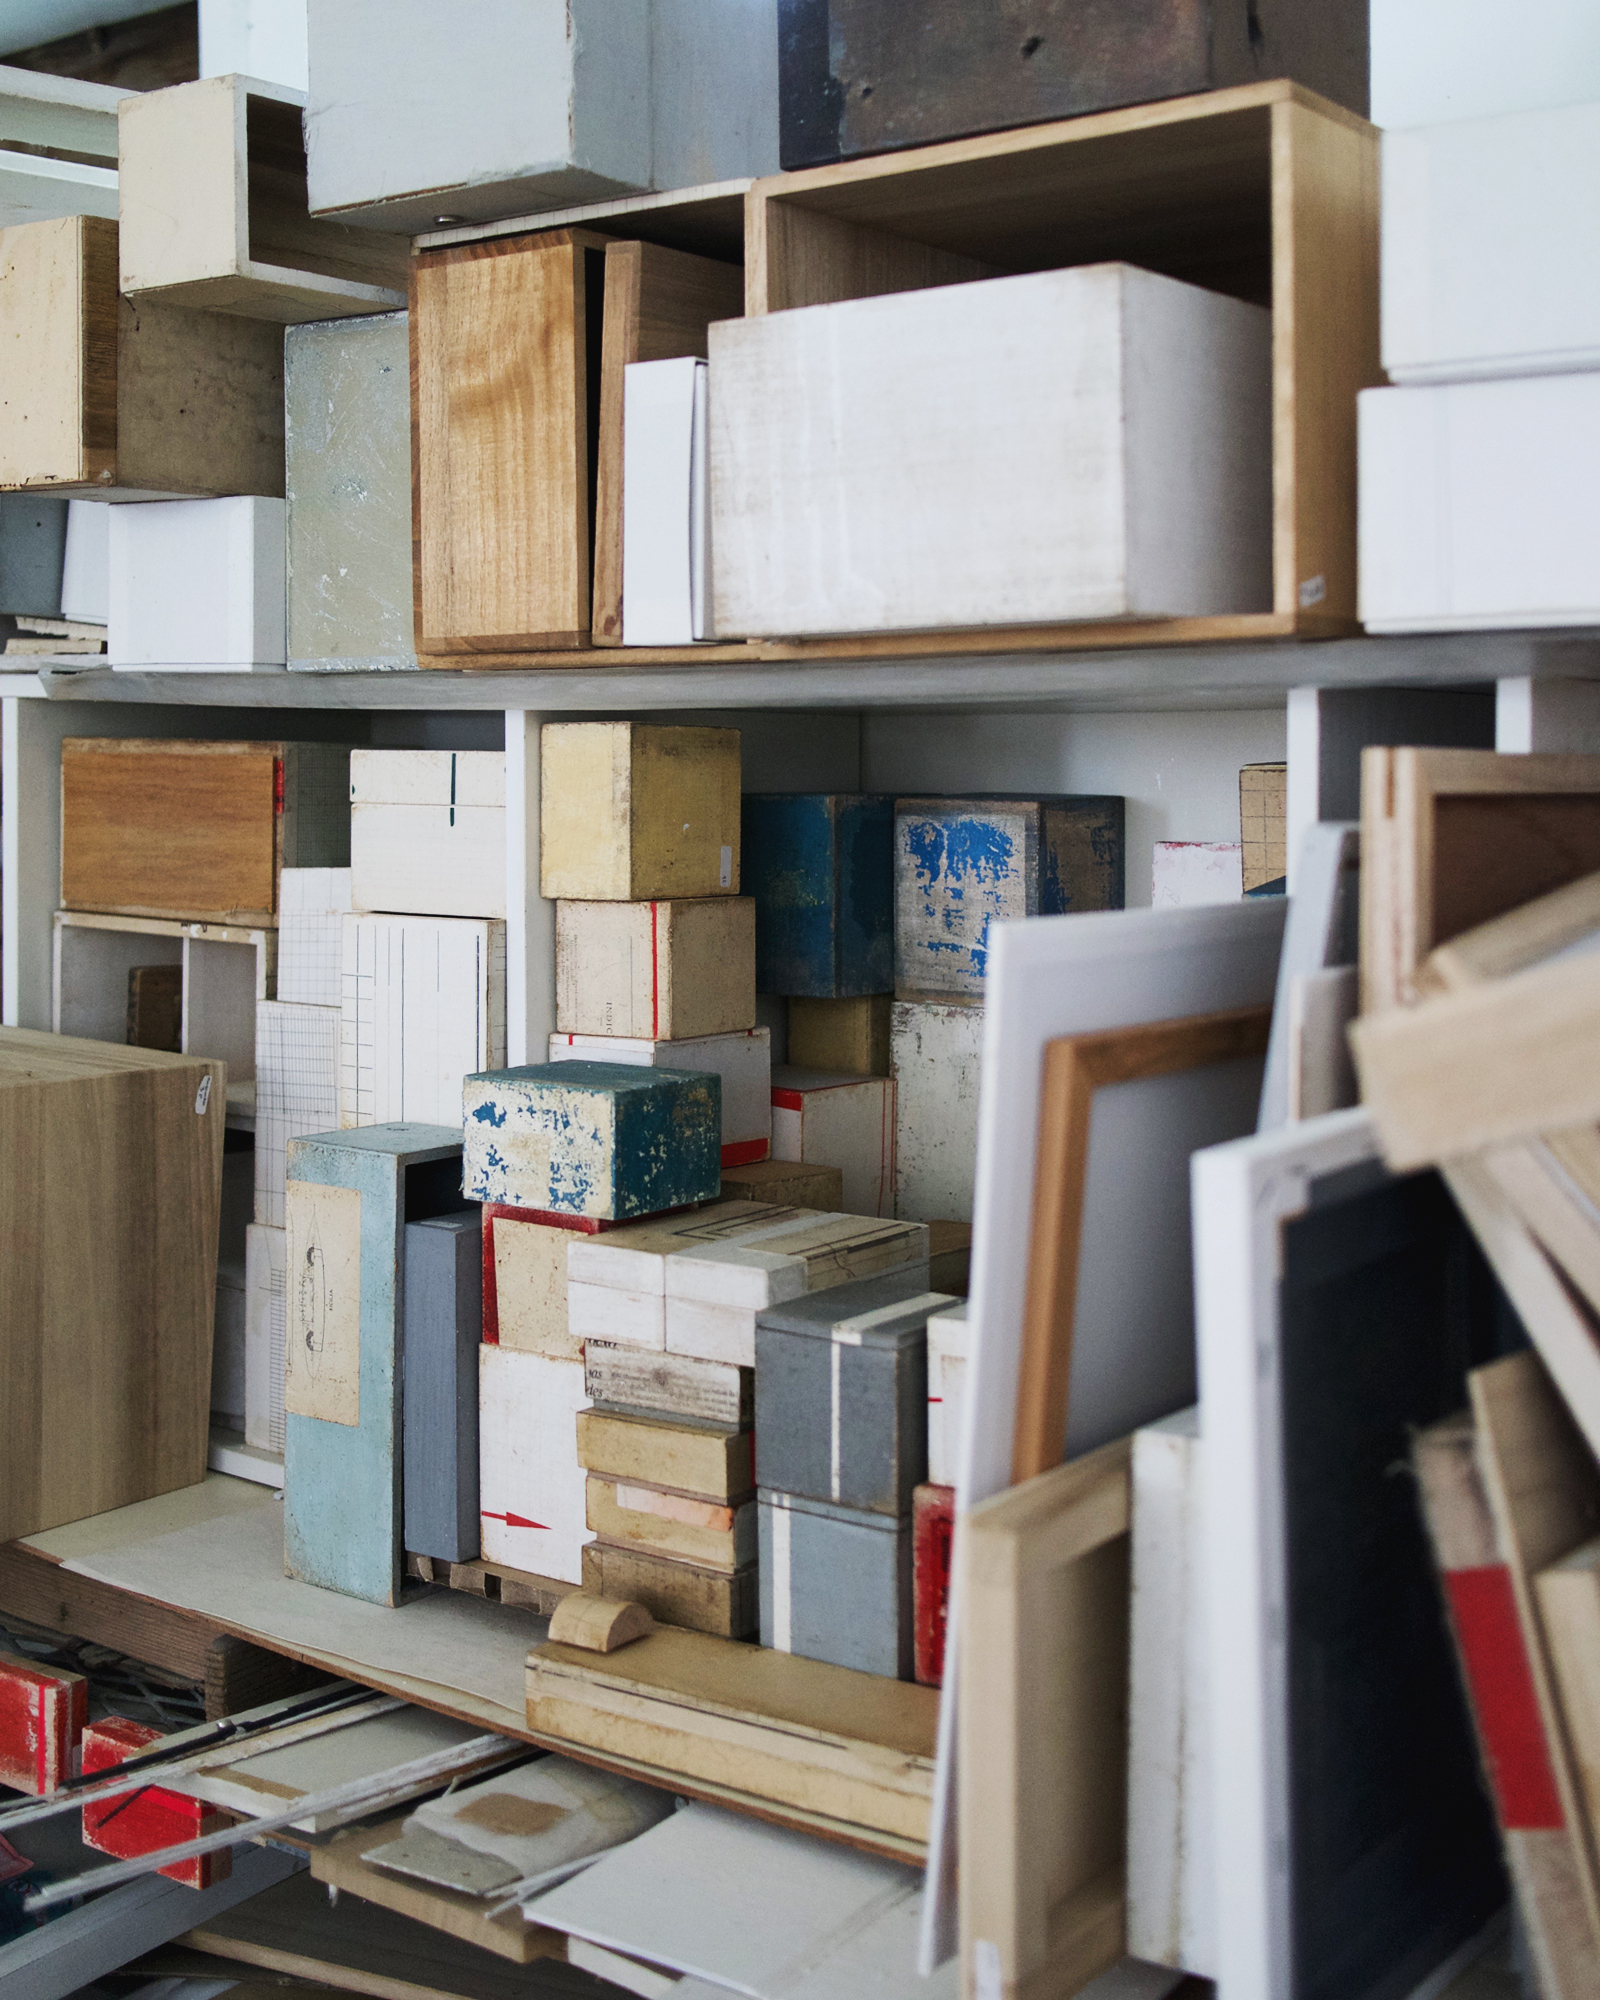 Shelves packed with Michiko Iwata's materials